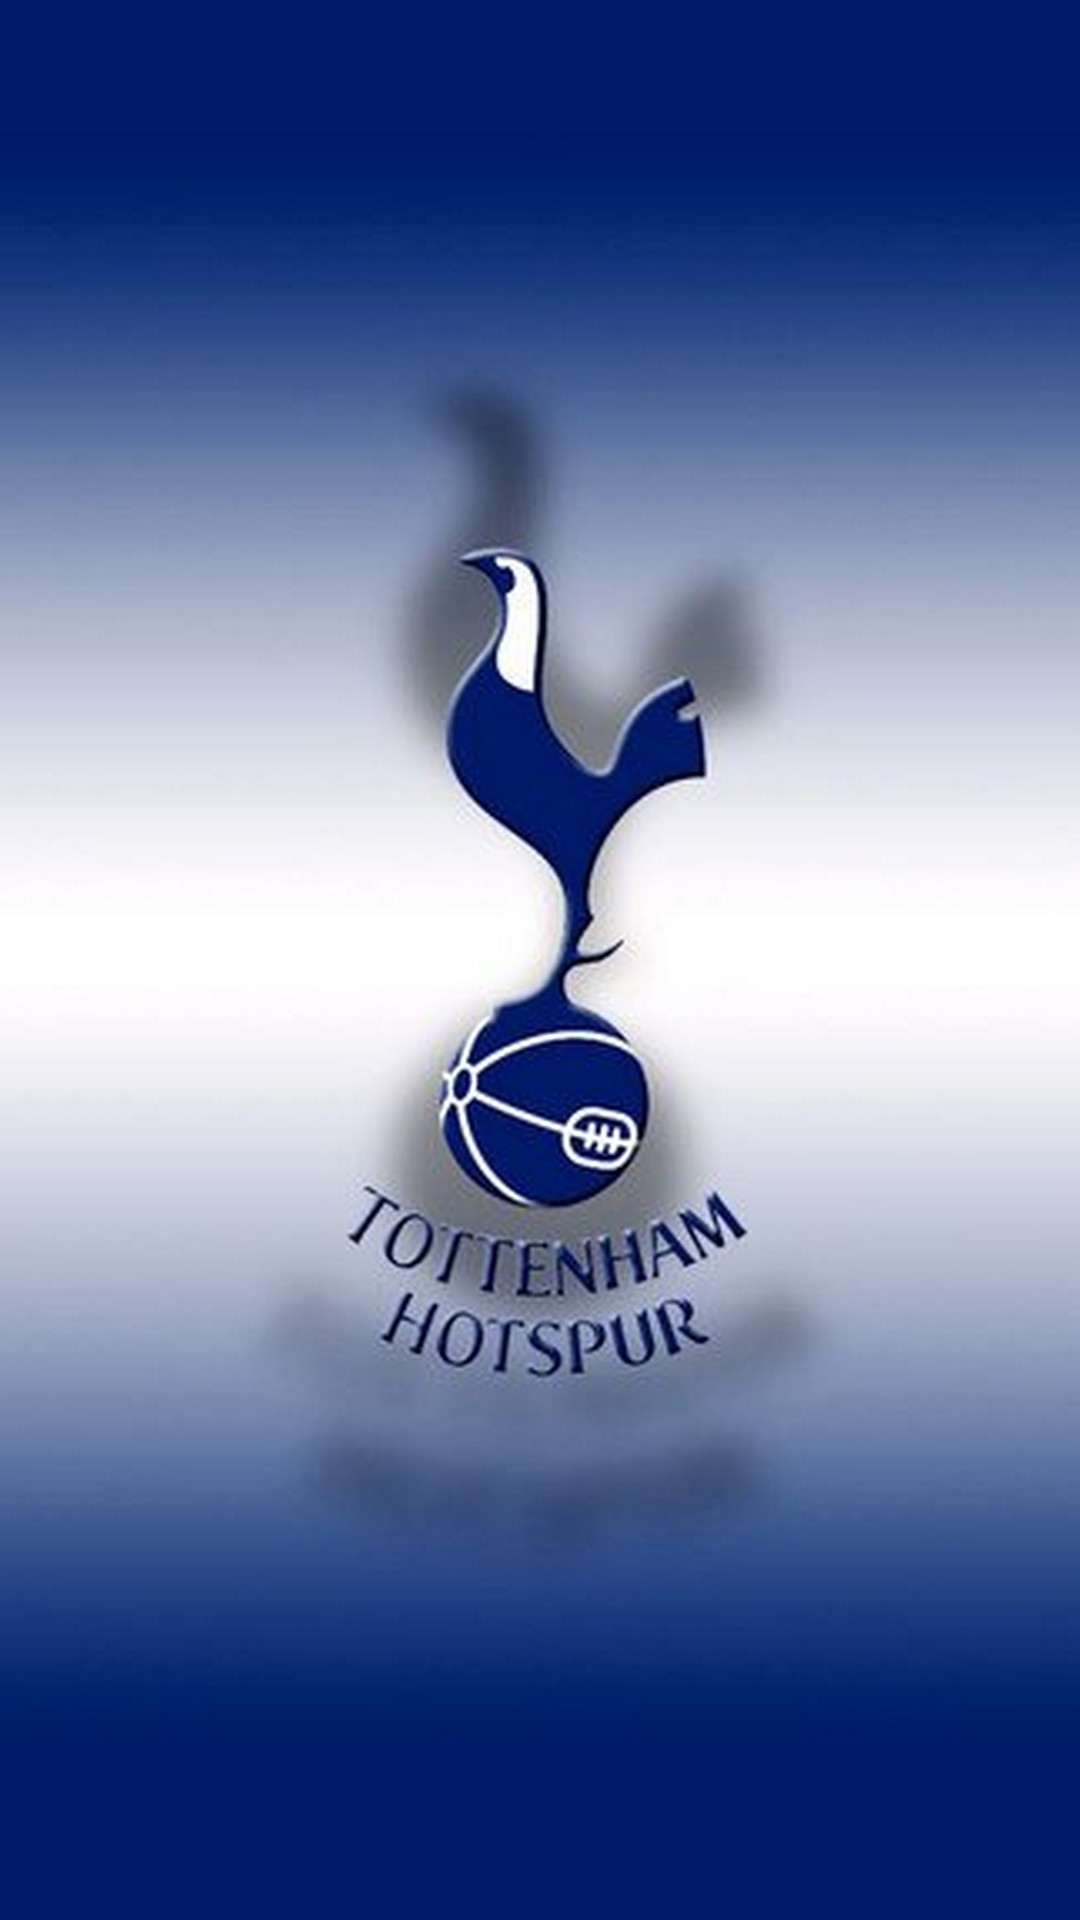 iPhone X Wallpaper Tottenham Hotspur with high-resolution 1080x1920 pixel. You can use this wallpaper for your iPhone 5, 6, 7, 8, X, XS, XR backgrounds, Mobile Screensaver, or iPad Lock Screen